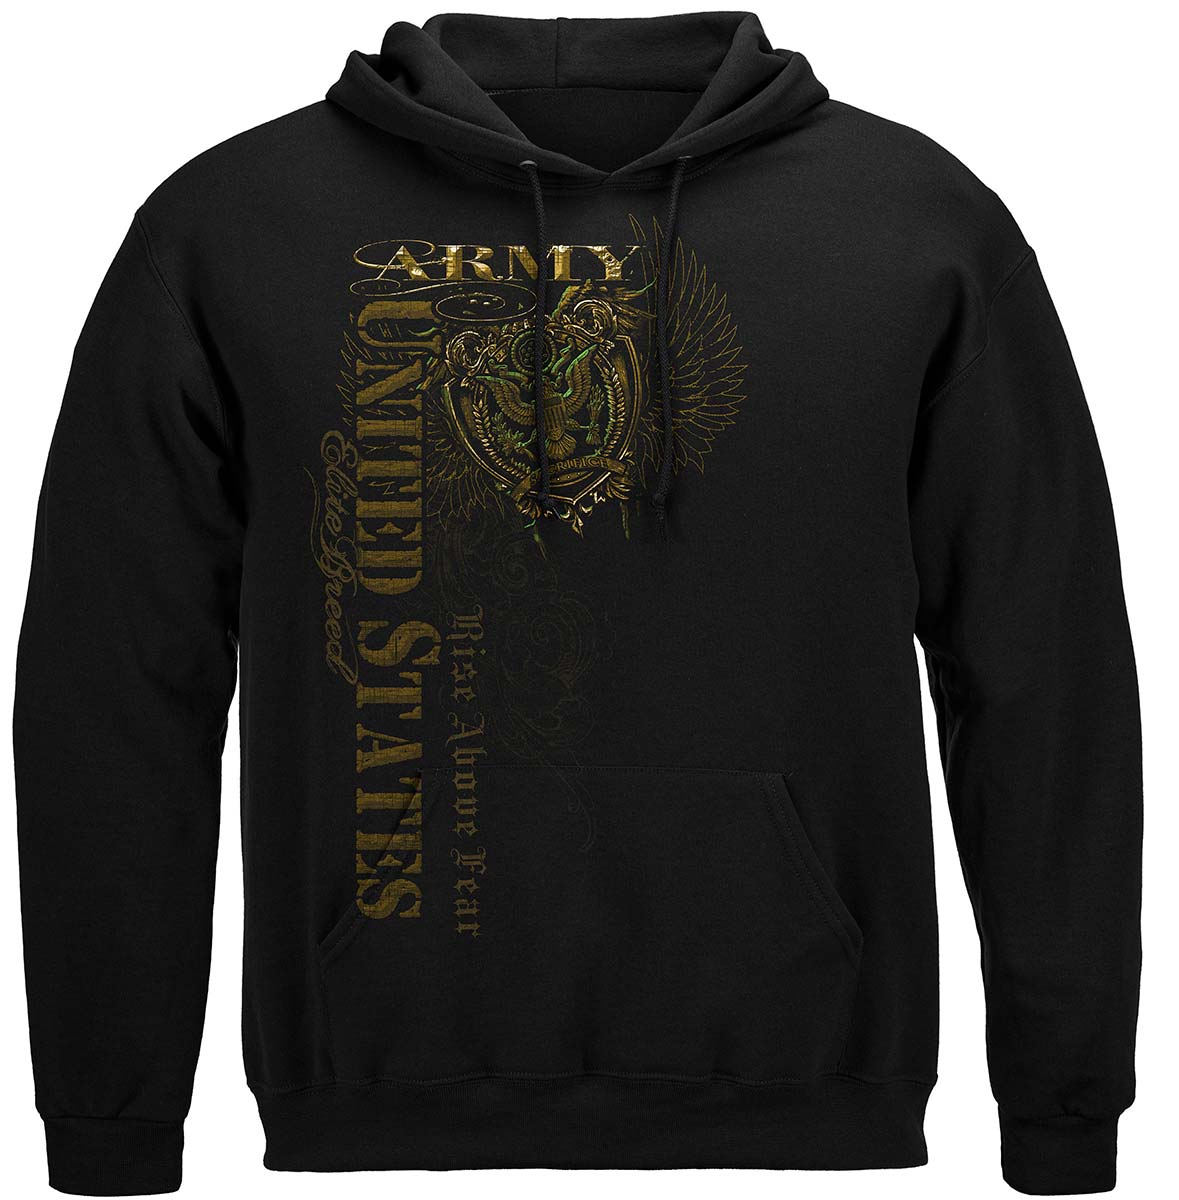 Army Crest Elite Breed Rise Above Fear Premium T-Shirt